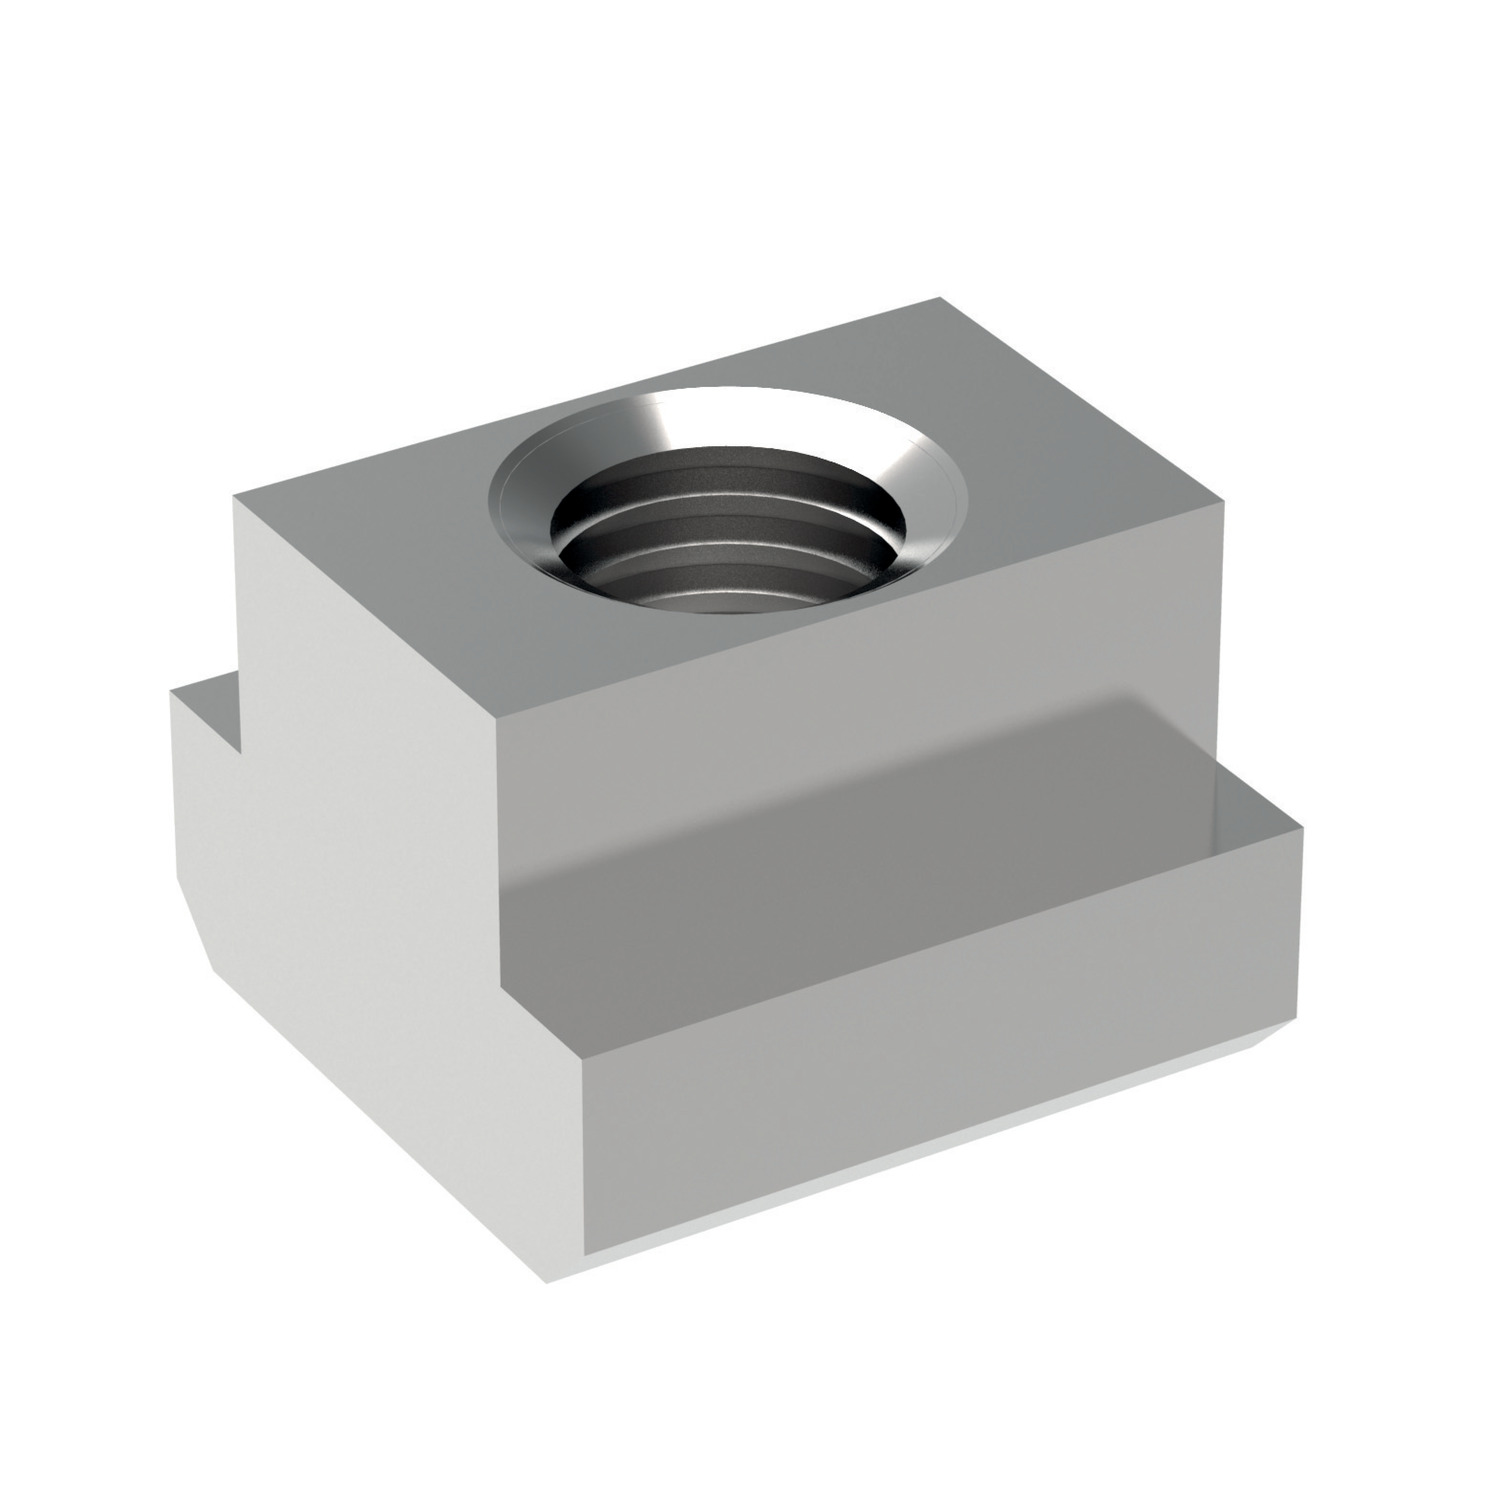 T-Nuts T-Nuts to DIN 508. Stainless steel (AISI 304, 1.4301).